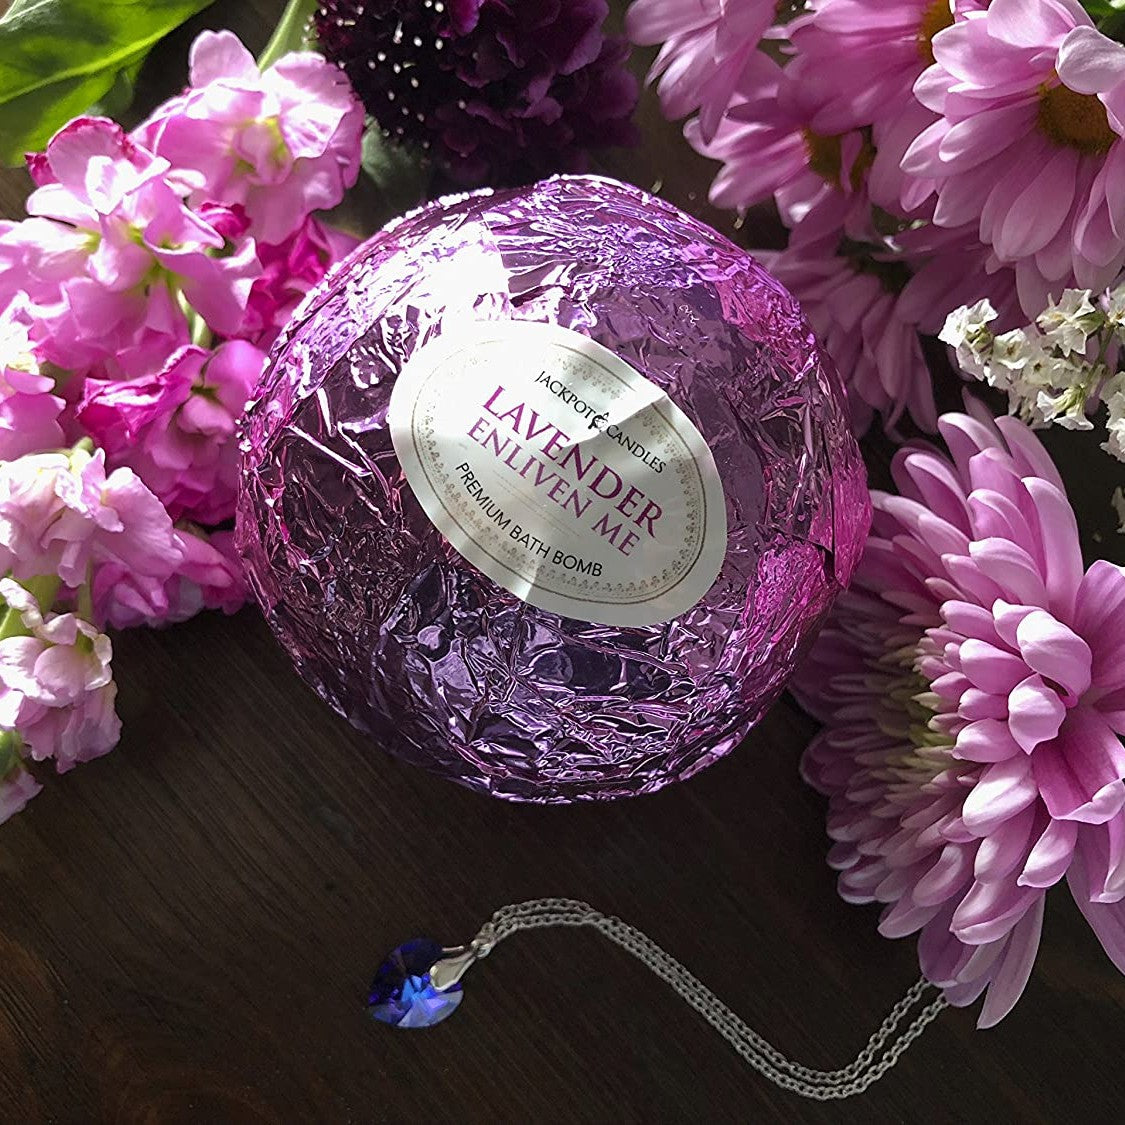 A bath bomb wrapped in purple foil with a label that says, 'lavender.' There is a blue heart shaped necklace next to the bath bomb. There are purple flowers surrounding the bath bomb and necklace.